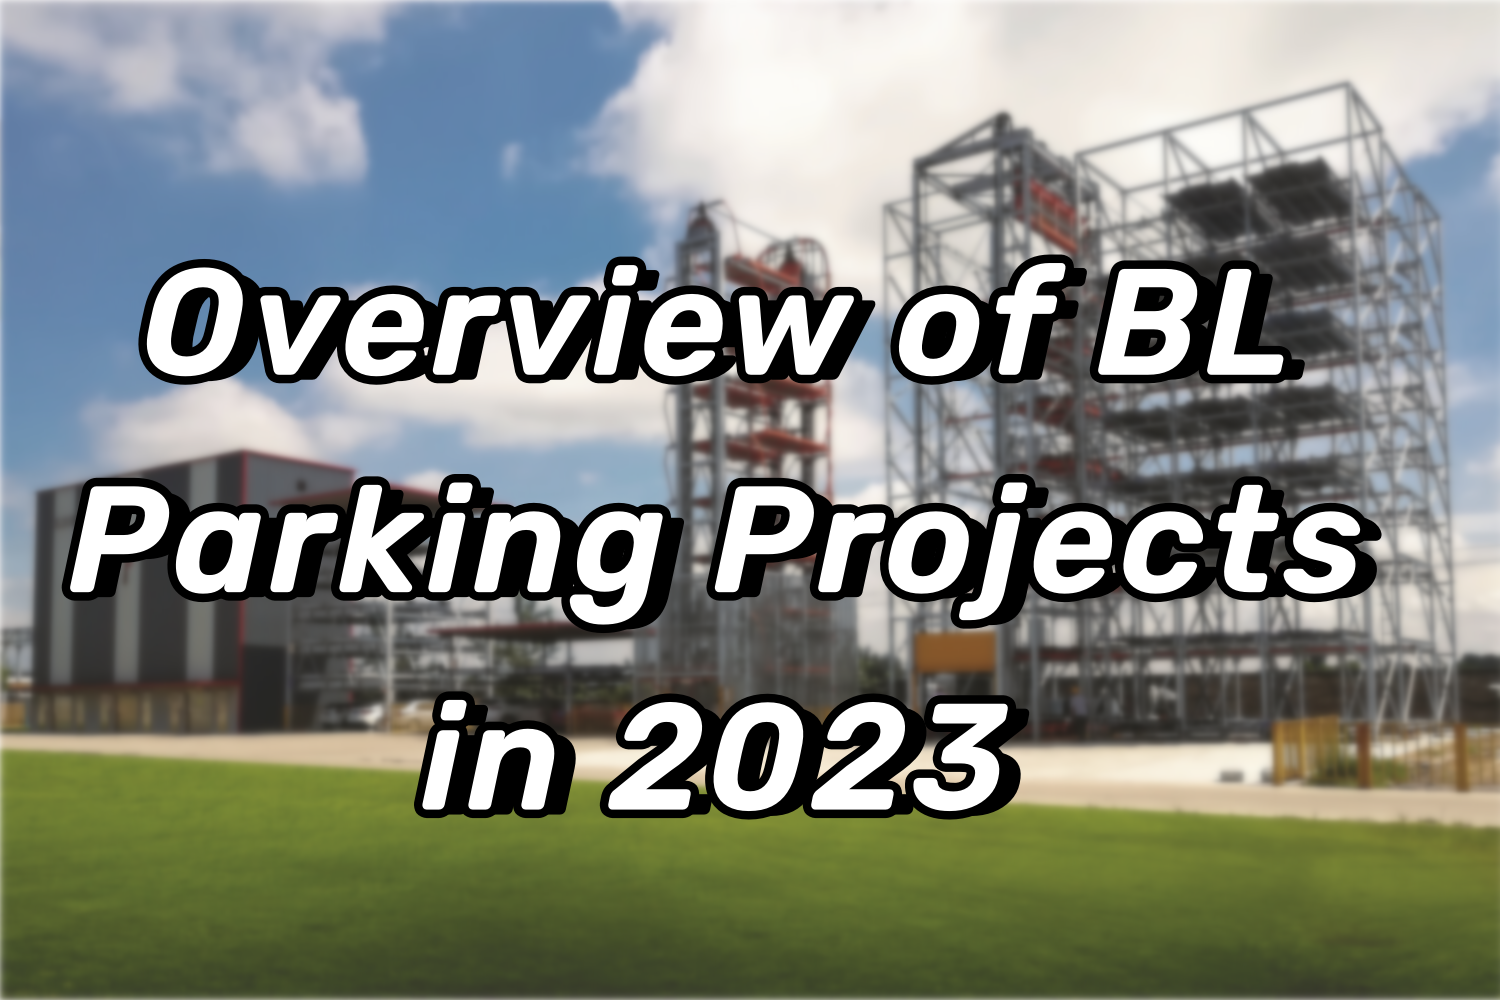 Overview of BL Parking Projects in 2023